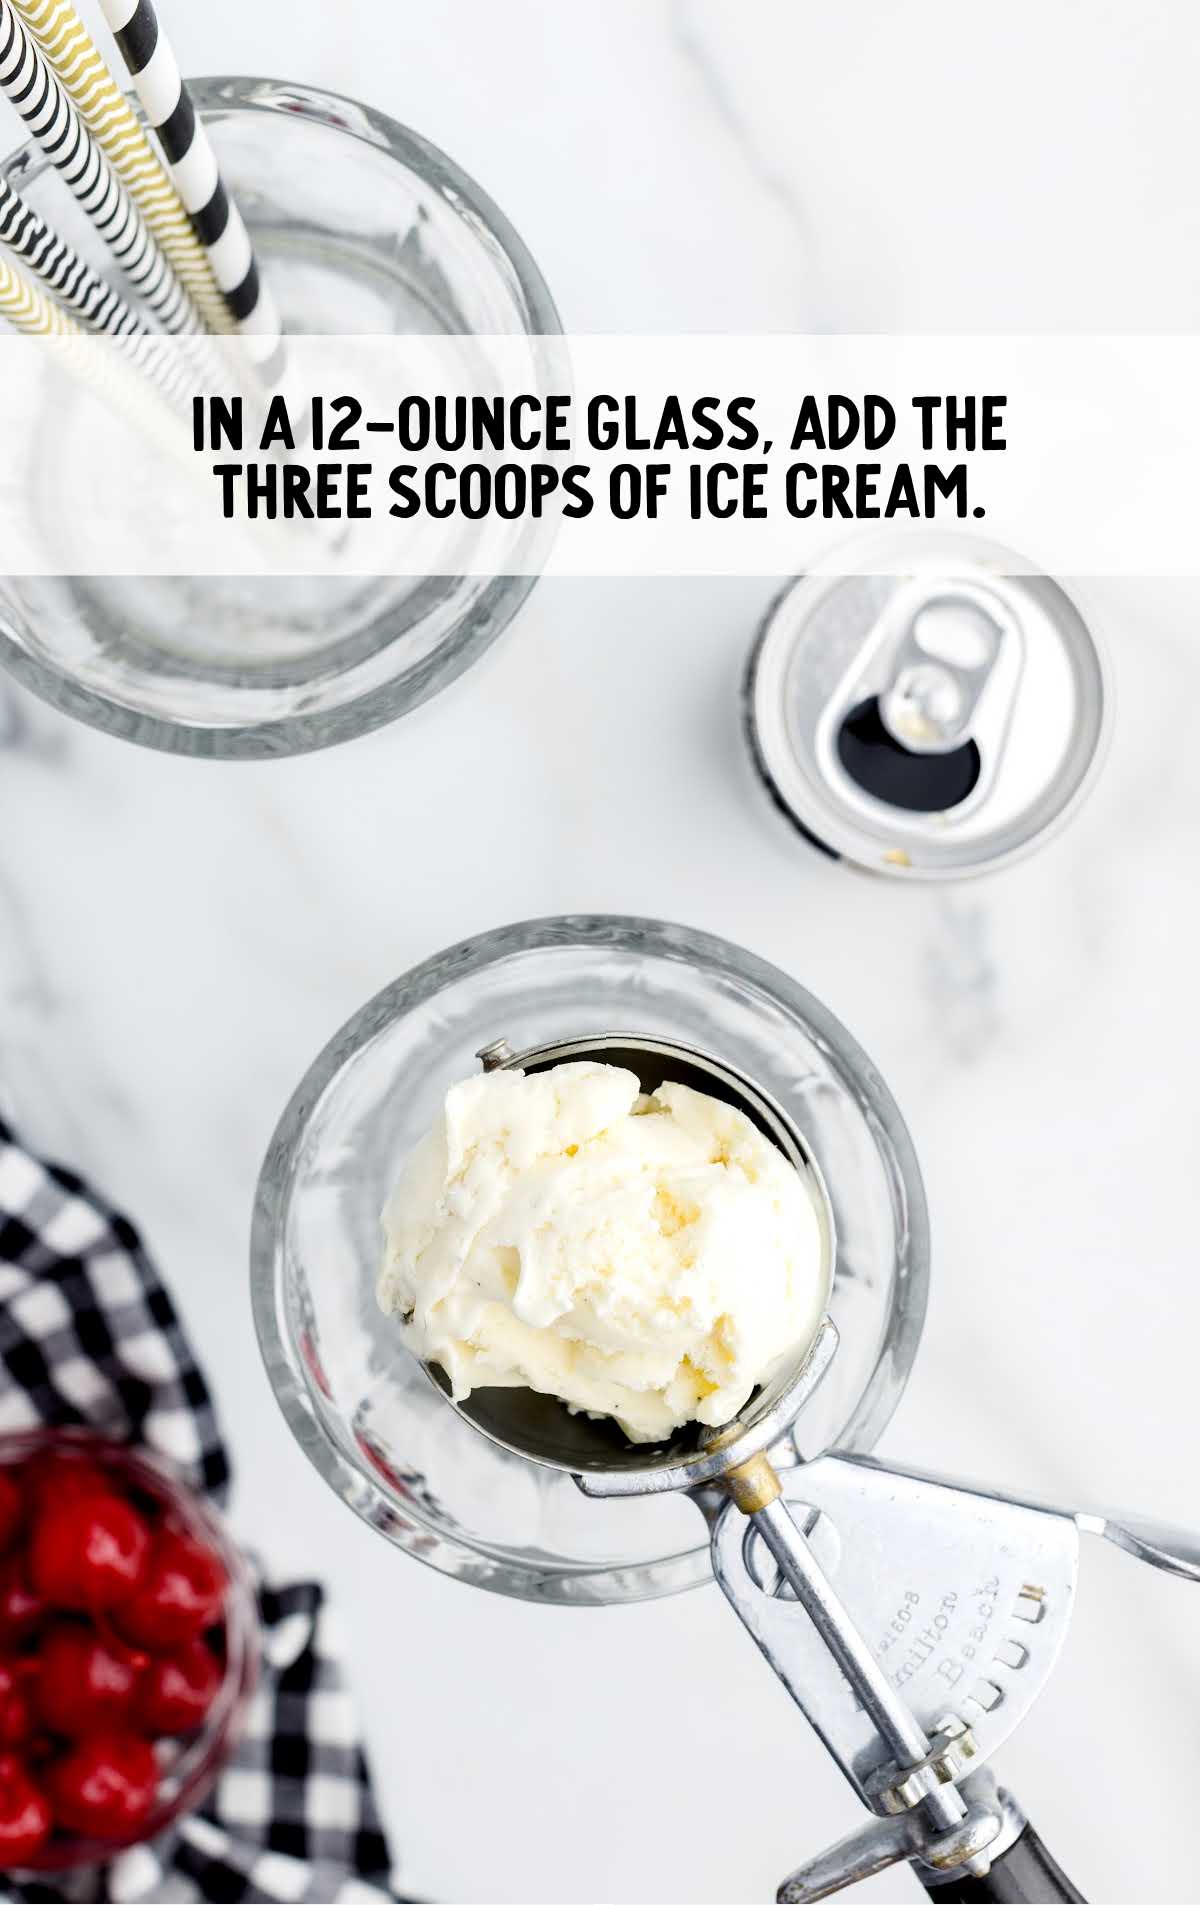 add ice cream to the tall glass